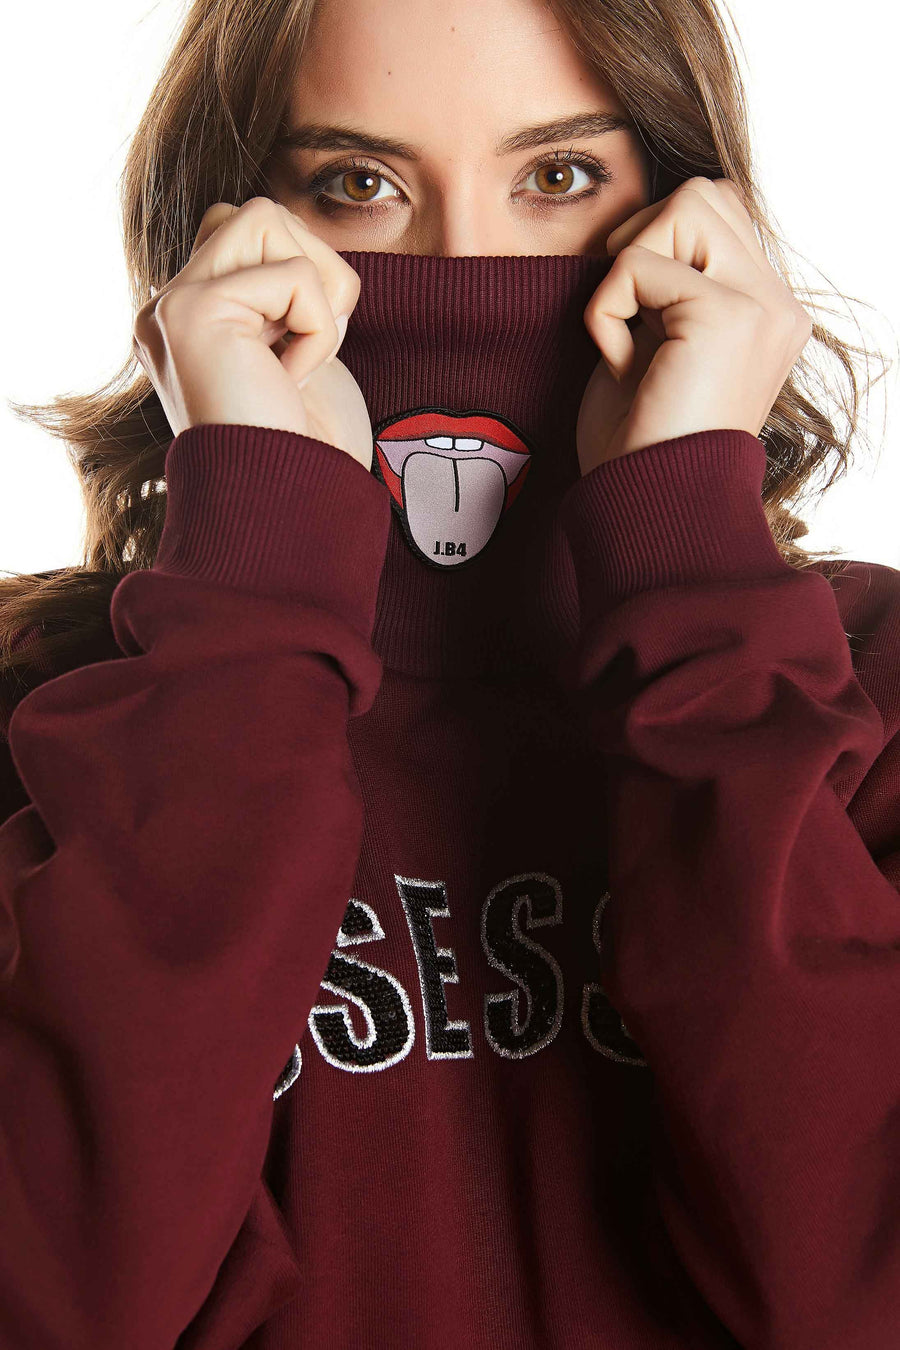 FLEECE DRESS WITH BURGUNDY MOUTH PATCH